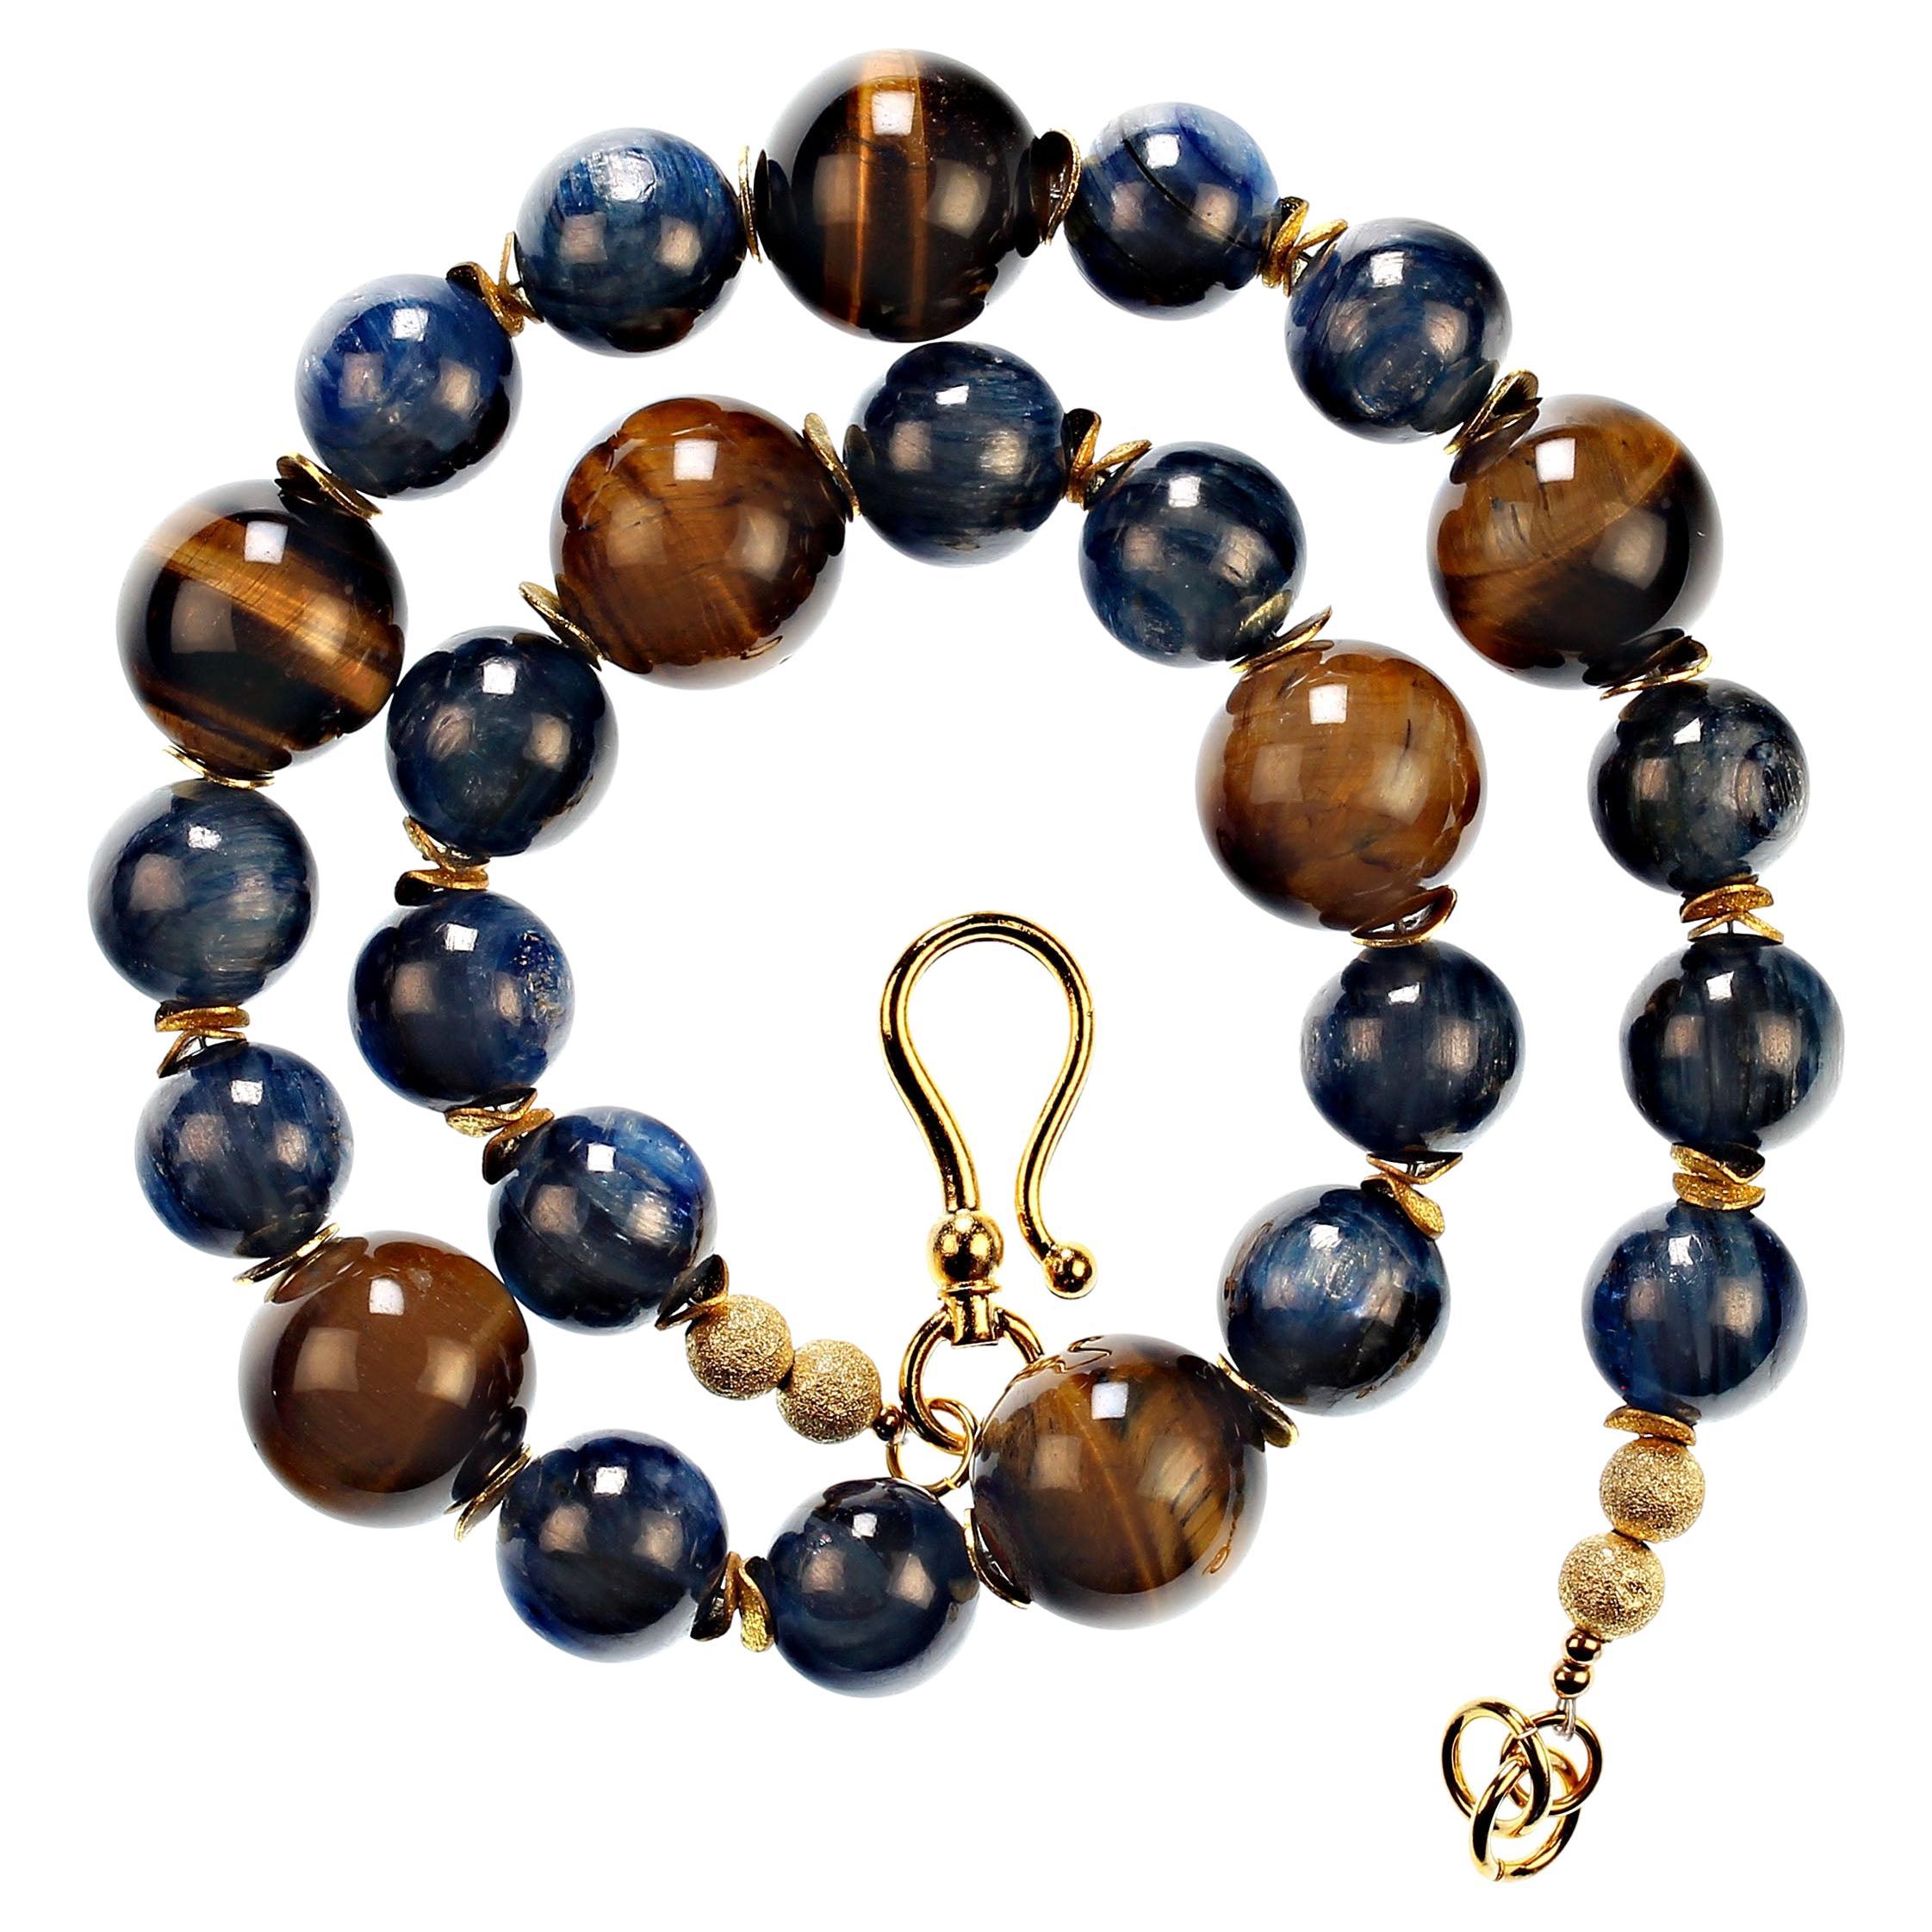 AJD 20 Inch Distinctive Necklace of Natural Tiger's Eye and Blue Kyanite